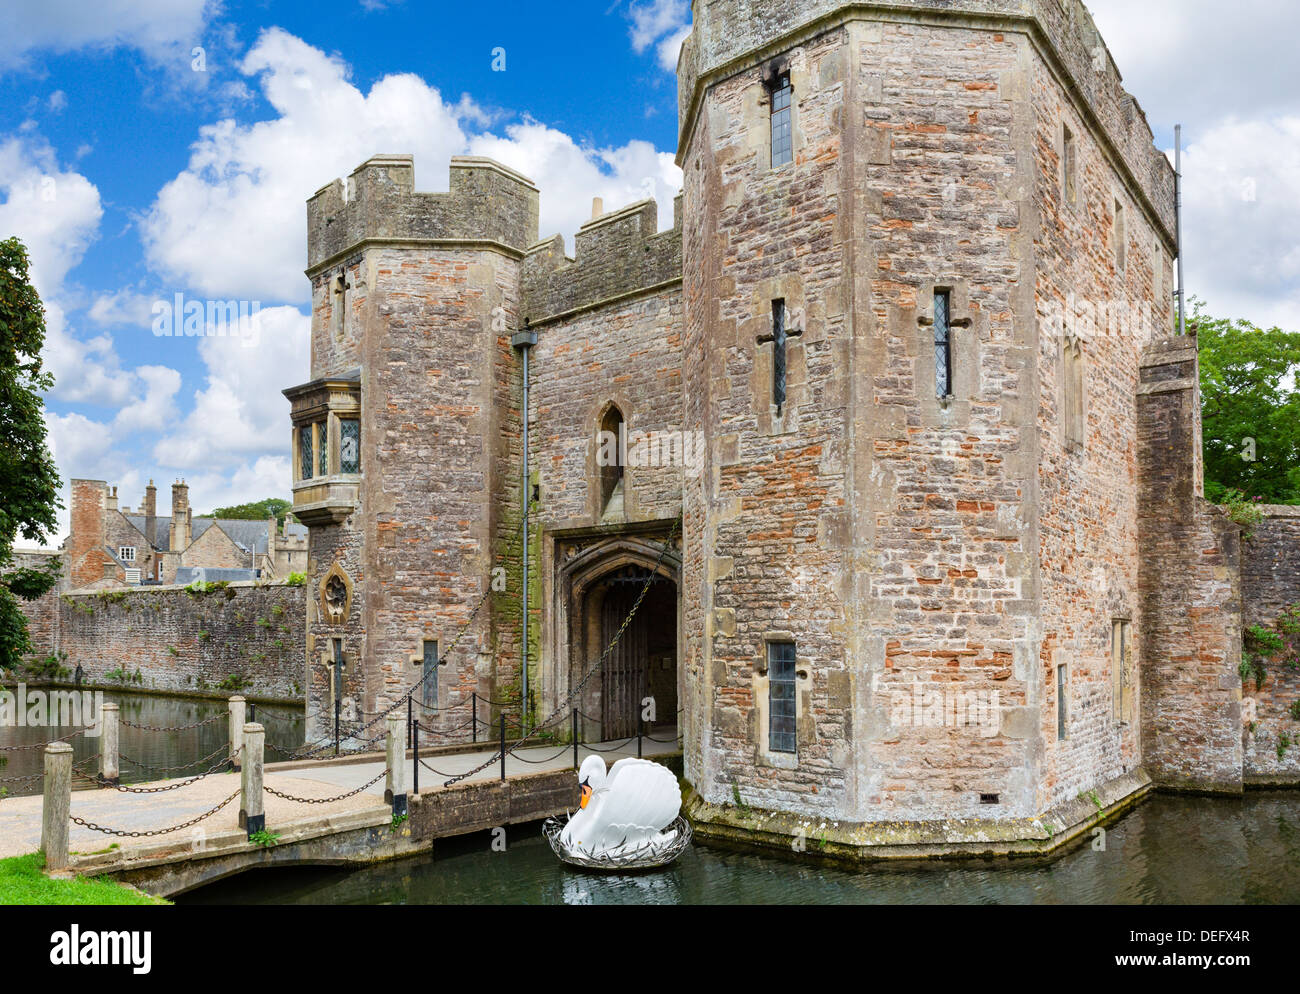 Gateway to the Bishop's Palace with swan sculpture in the moat, Wells, Somerset, England, UK Stock Photo